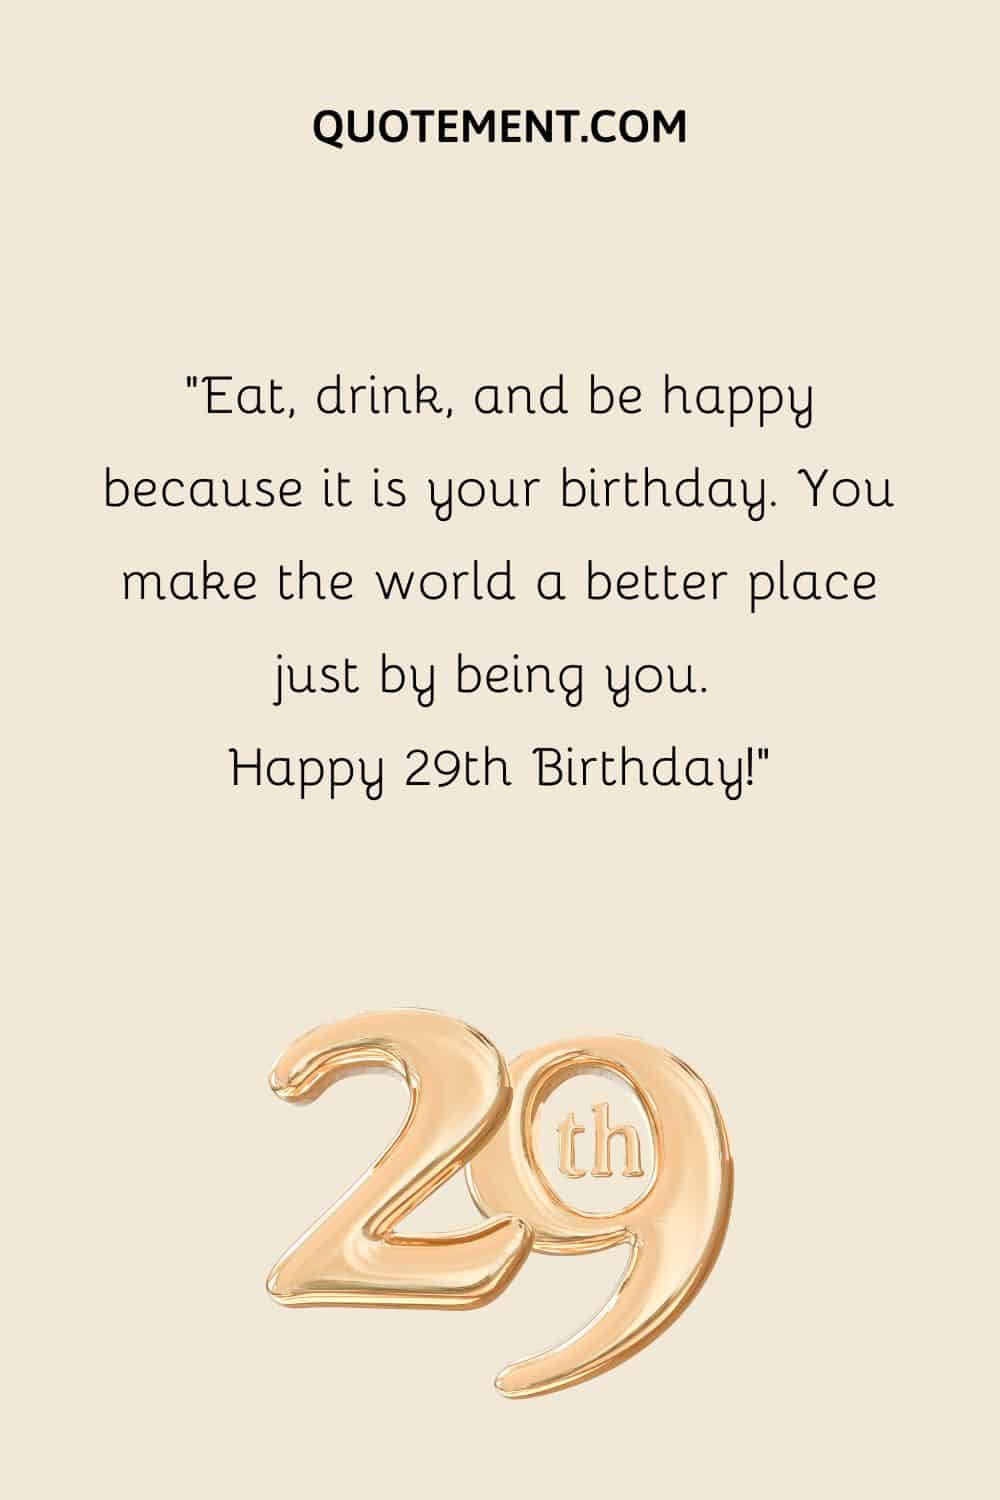 Eat, drink, and be happy because it is your birthday